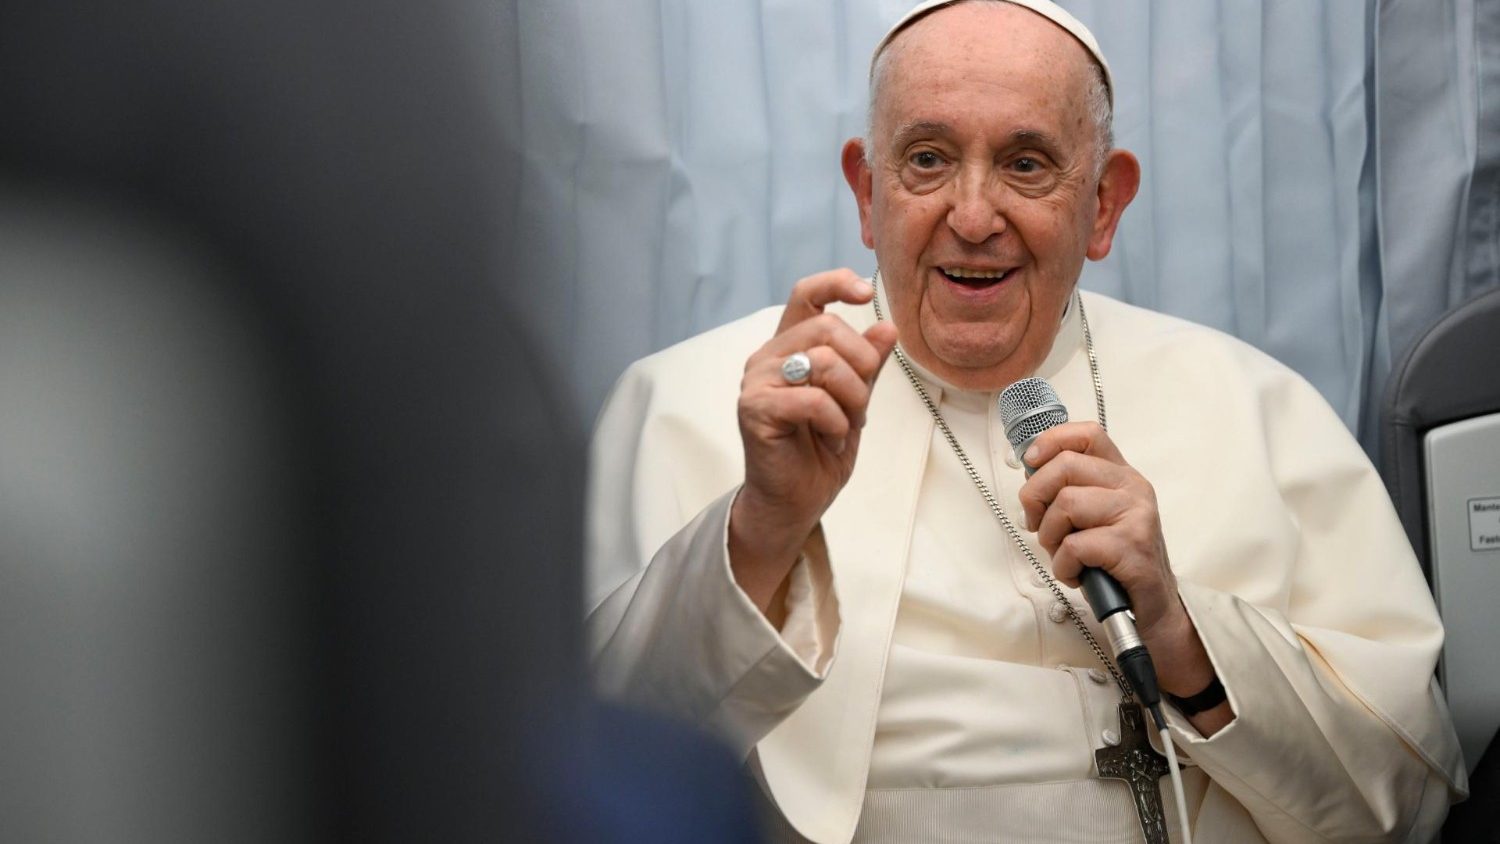 Pope Francis Urges Good Immigration Management, Condemns Euthanasia, and Addresses Ukraine Crisis in Press Conference